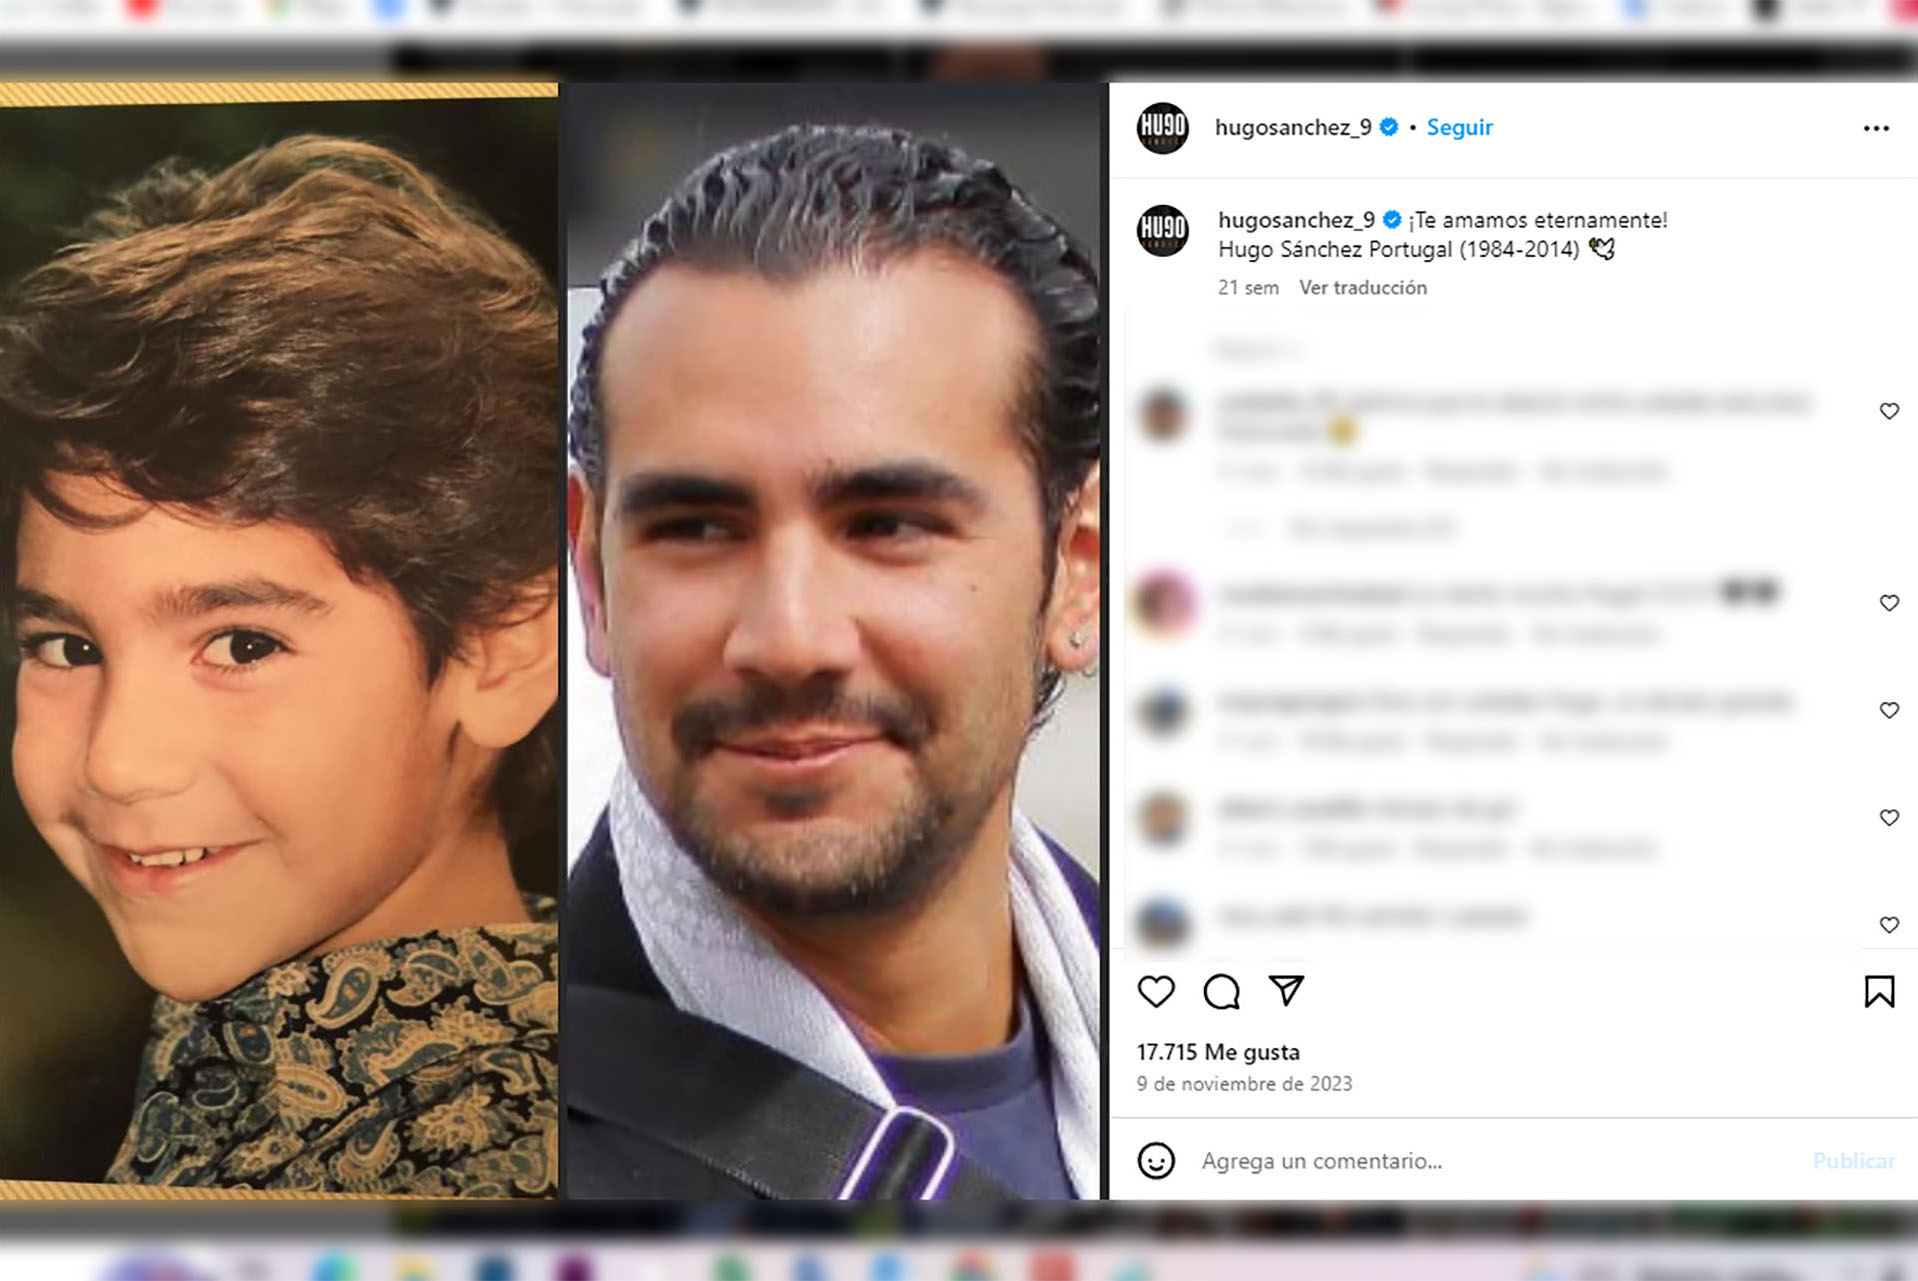 <p>On November 8, 2014, the Mexican police found the lifeless body of Hugo Sánchez Portugal along with that of his partner - also deceased - in the home they shared in the well-known Polanco neighborhood of Mexico City.</p> <p>Image: Official Instagram of Hugo Sánchez (@hugosanchez_9)</p>